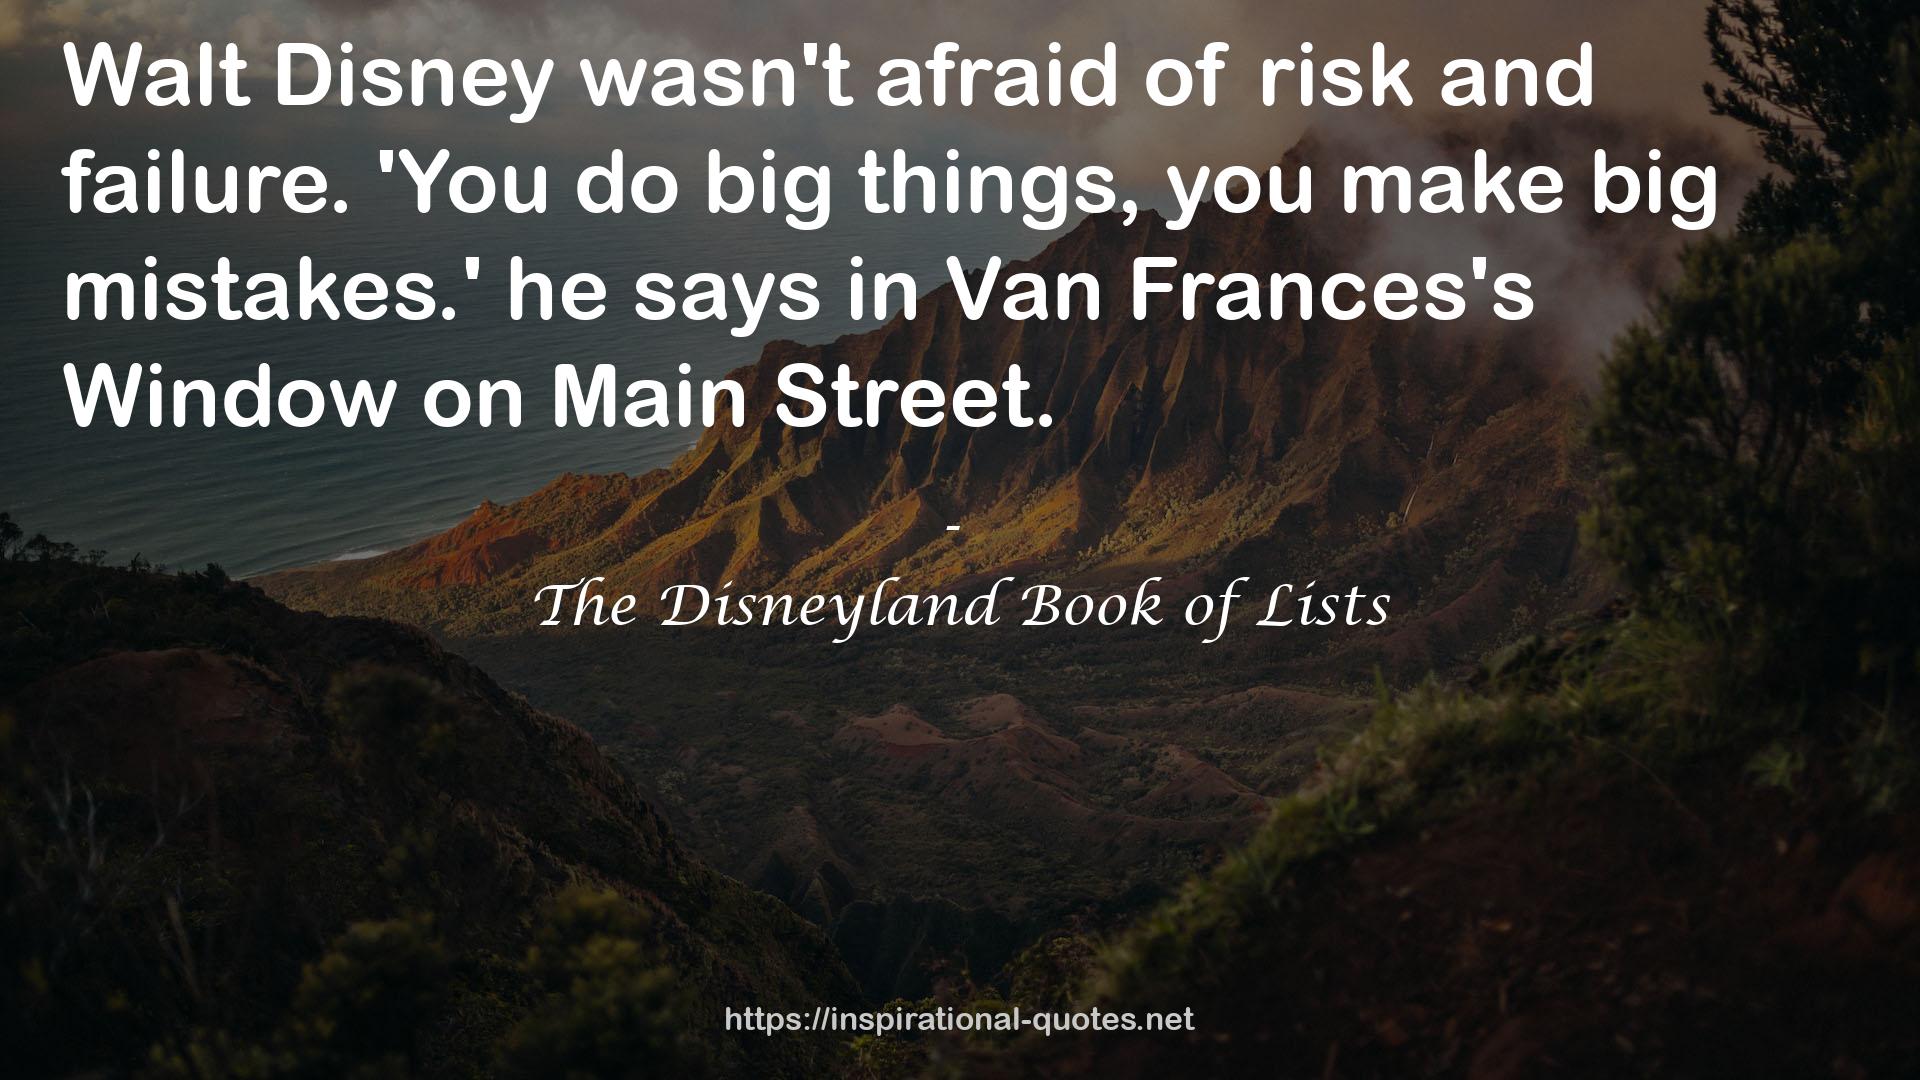 The Disneyland Book of Lists QUOTES